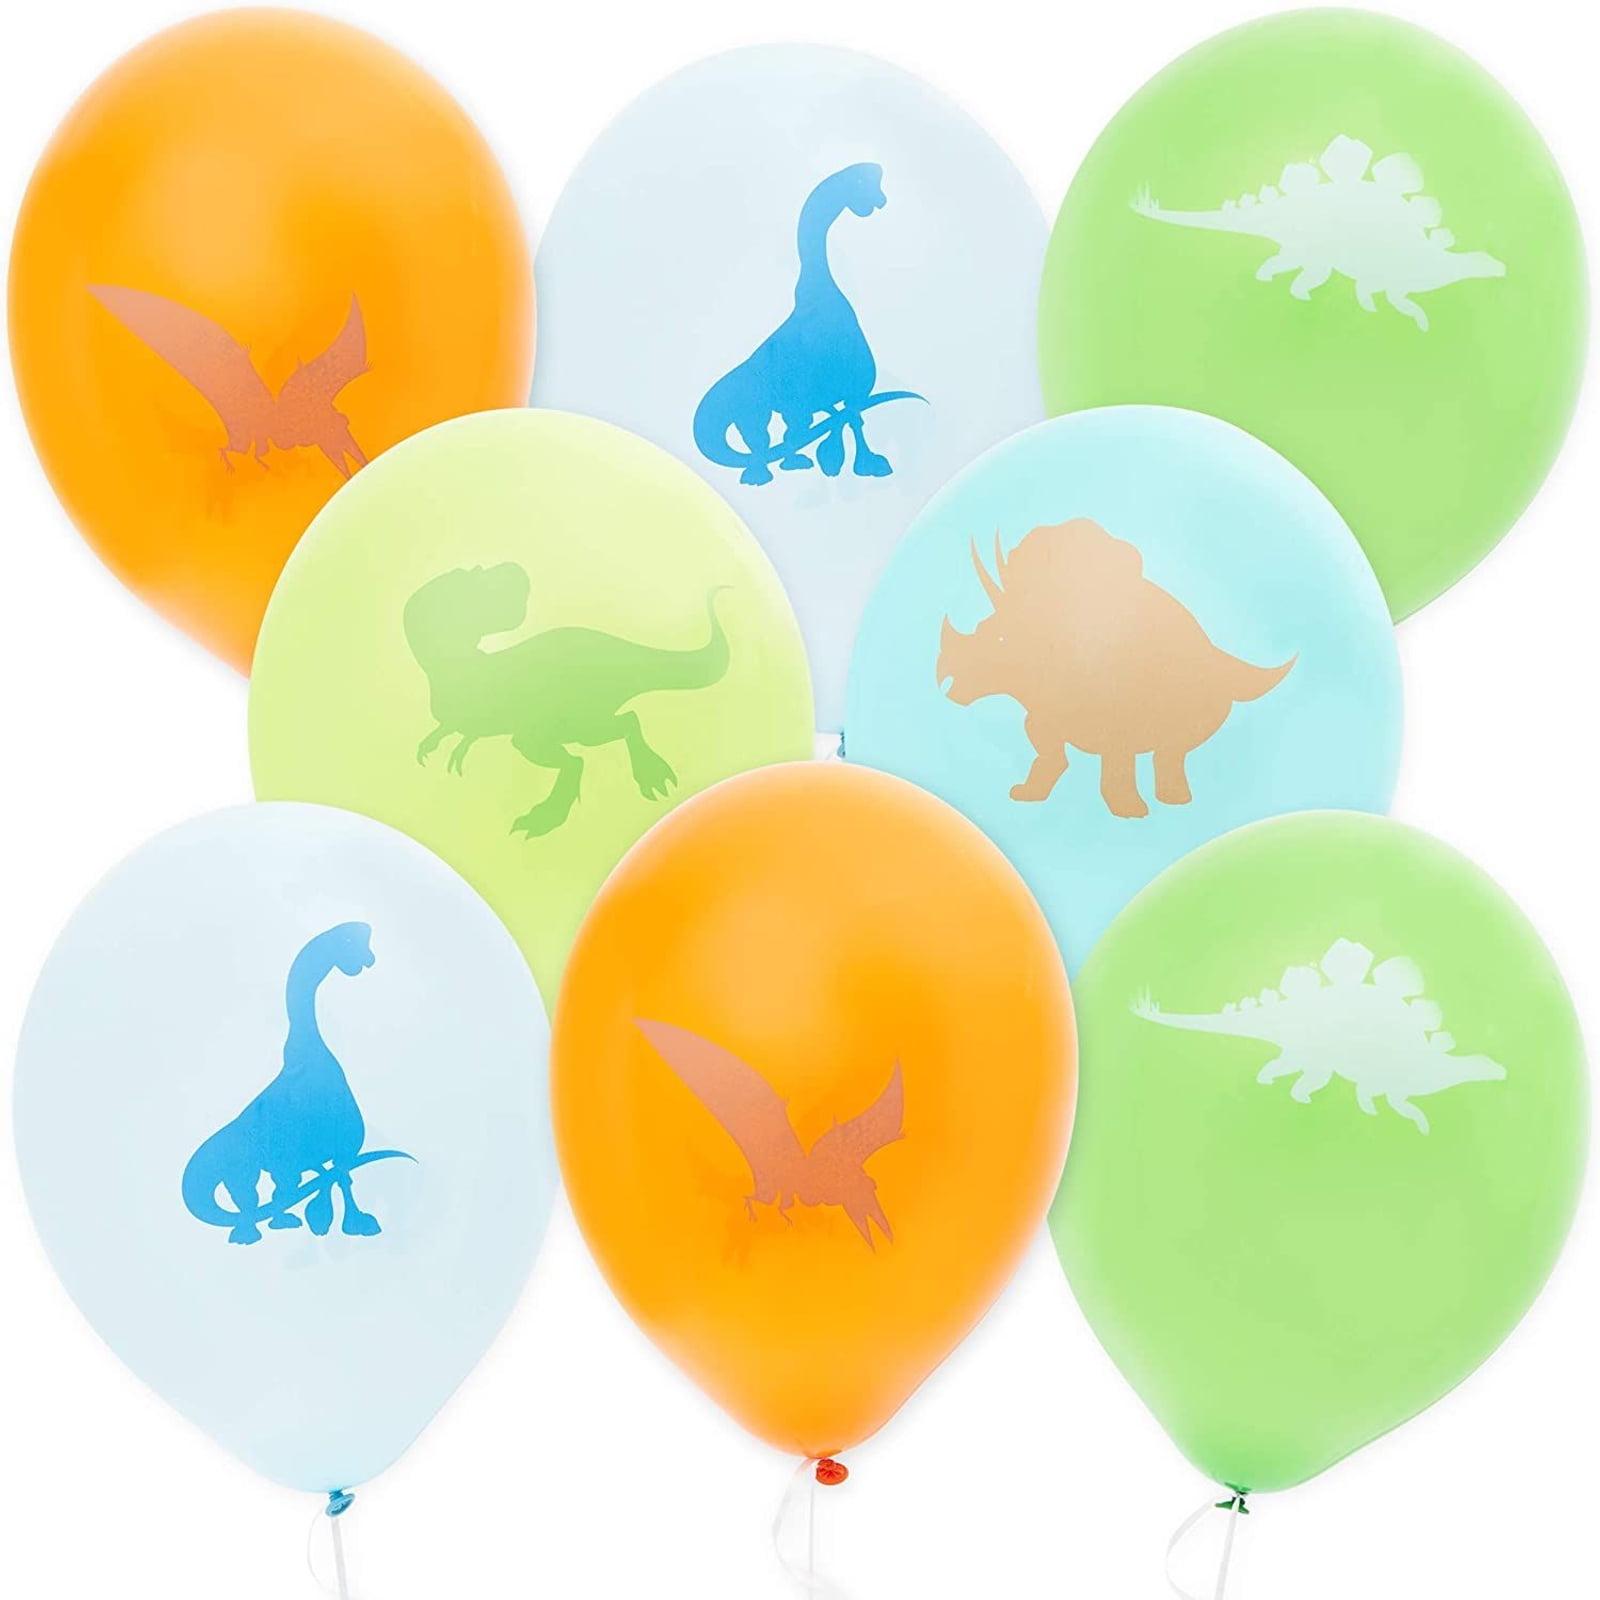 Dinosaur Party Stickers T Rex Stegosaurus Party Favours Pack of 50 Free Postage